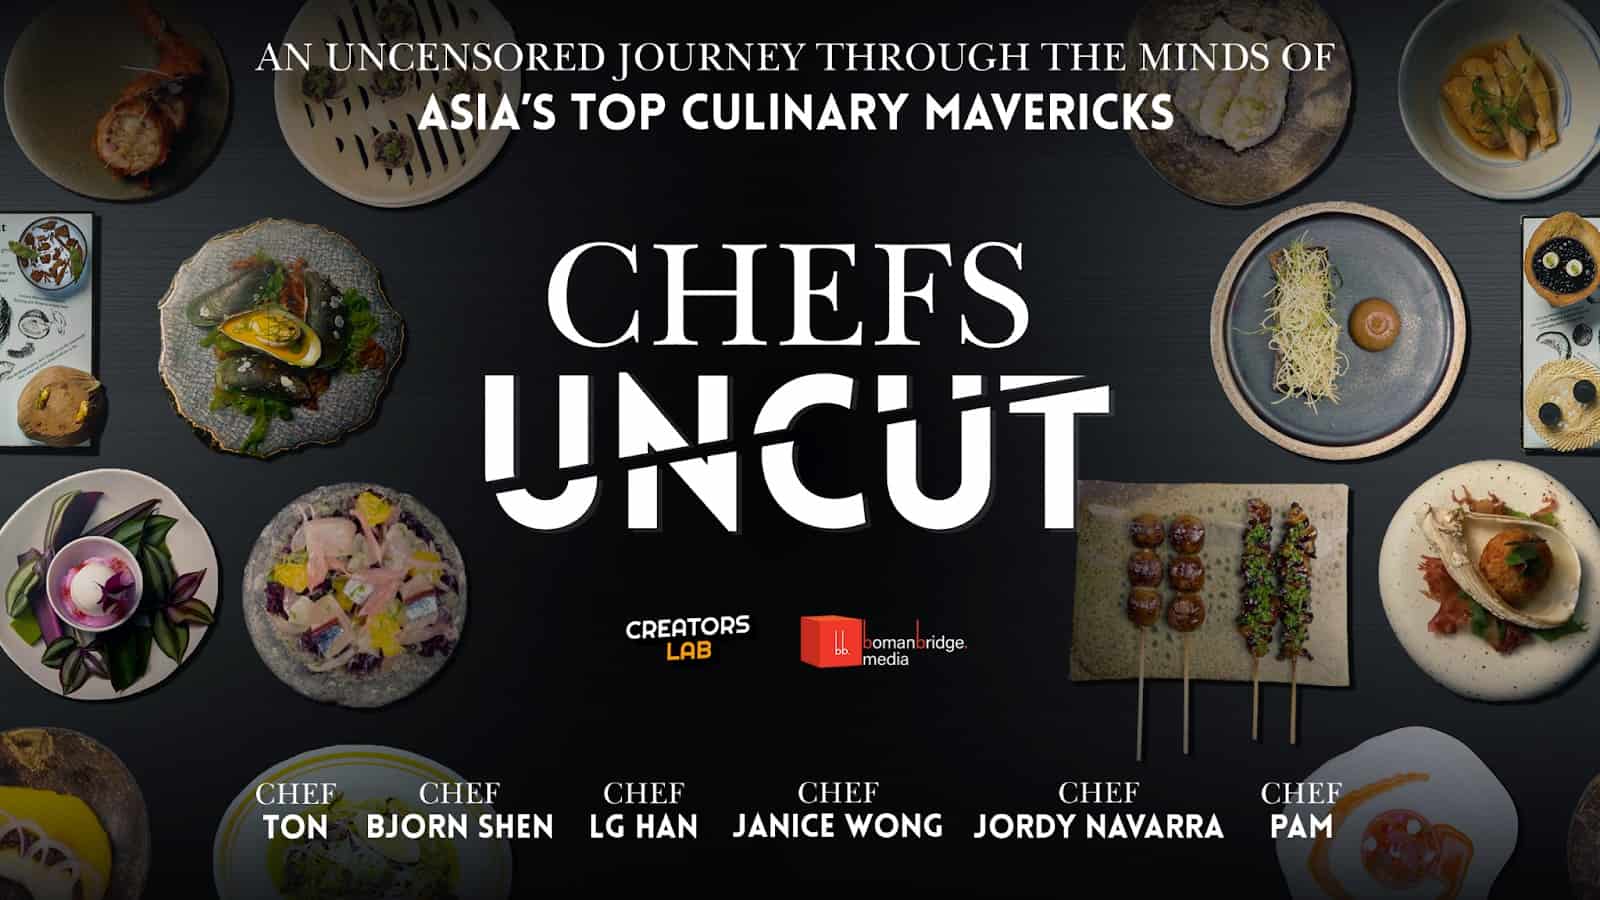 ‘Chefs Uncut,’ Asia’s Inaugural Chef’s Story Series, Secures International Distribution Deal